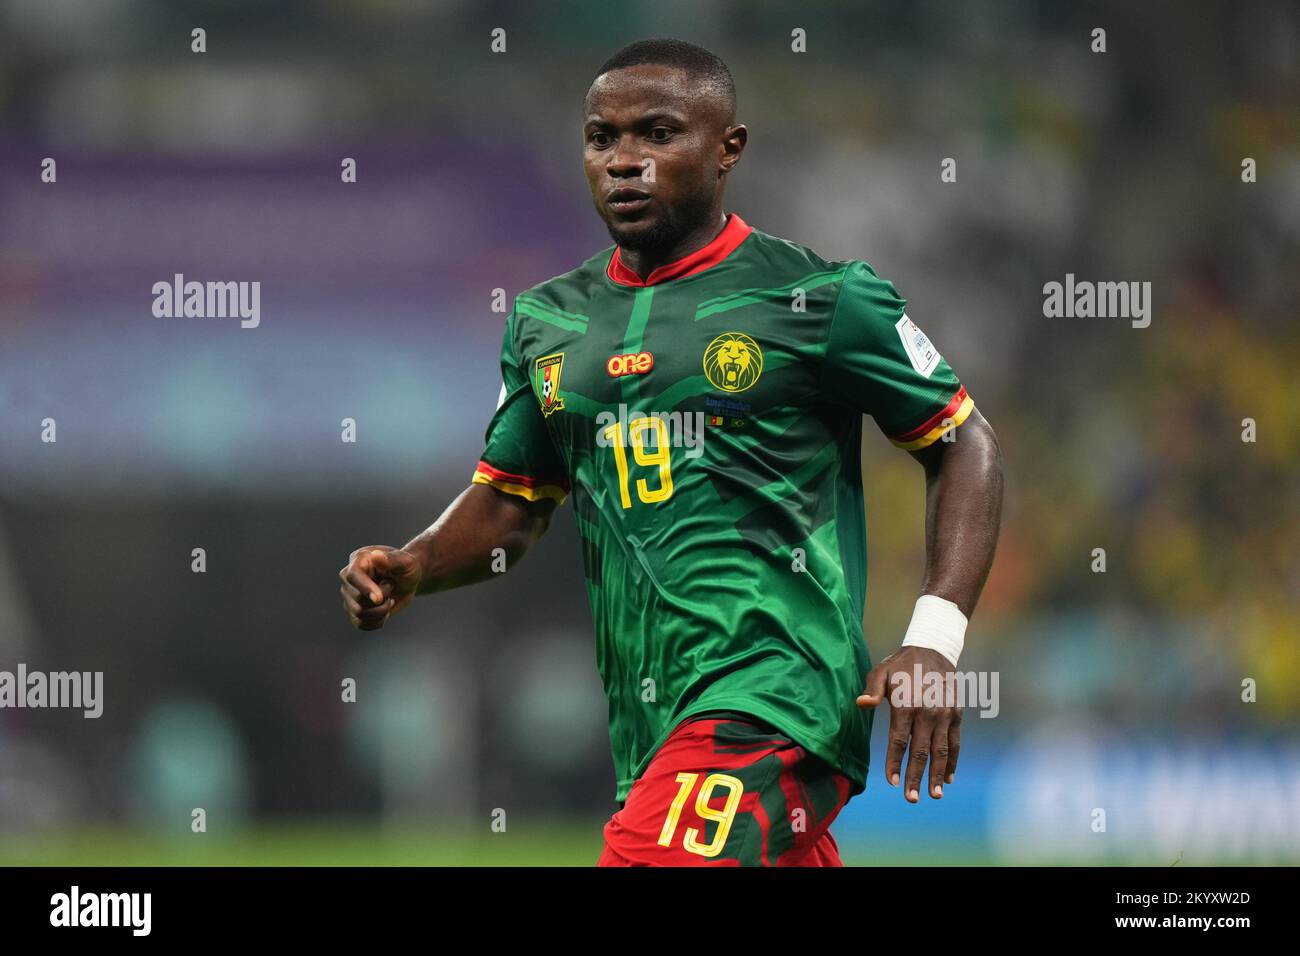 Collins Fai of Cameroon during the FIFA World Cup Qatar 2022 match, Group G, between Cameroon and Brazil played at Lusail Stadium on Dec 2, 2022 in Lusail, Qatar. (Photo by Bagu Blanco / PRESSIN) Stock Photo